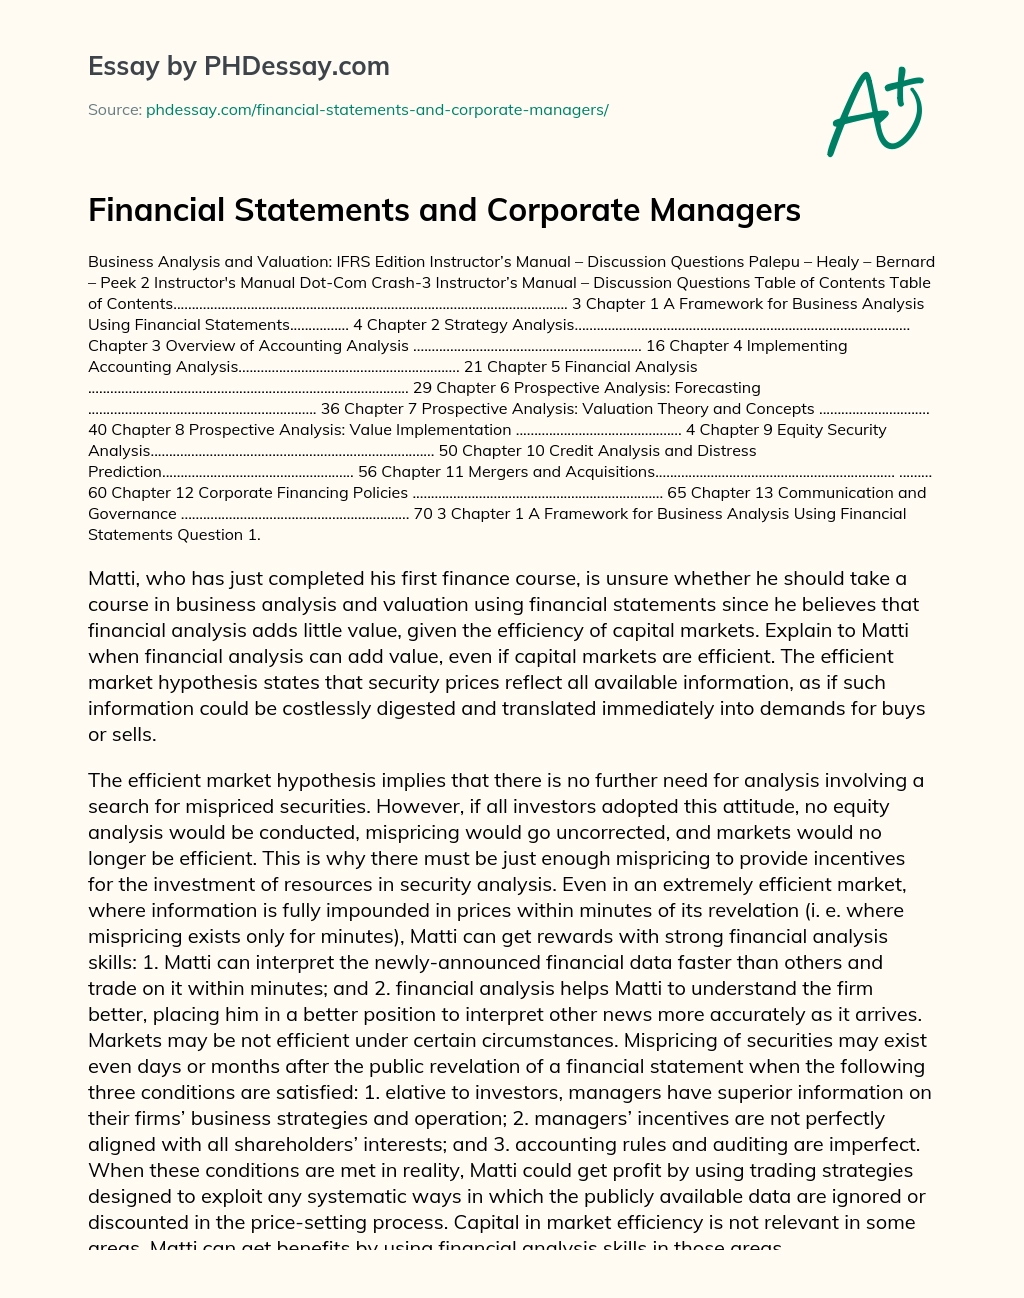 Financial Statements and Corporate Managers essay